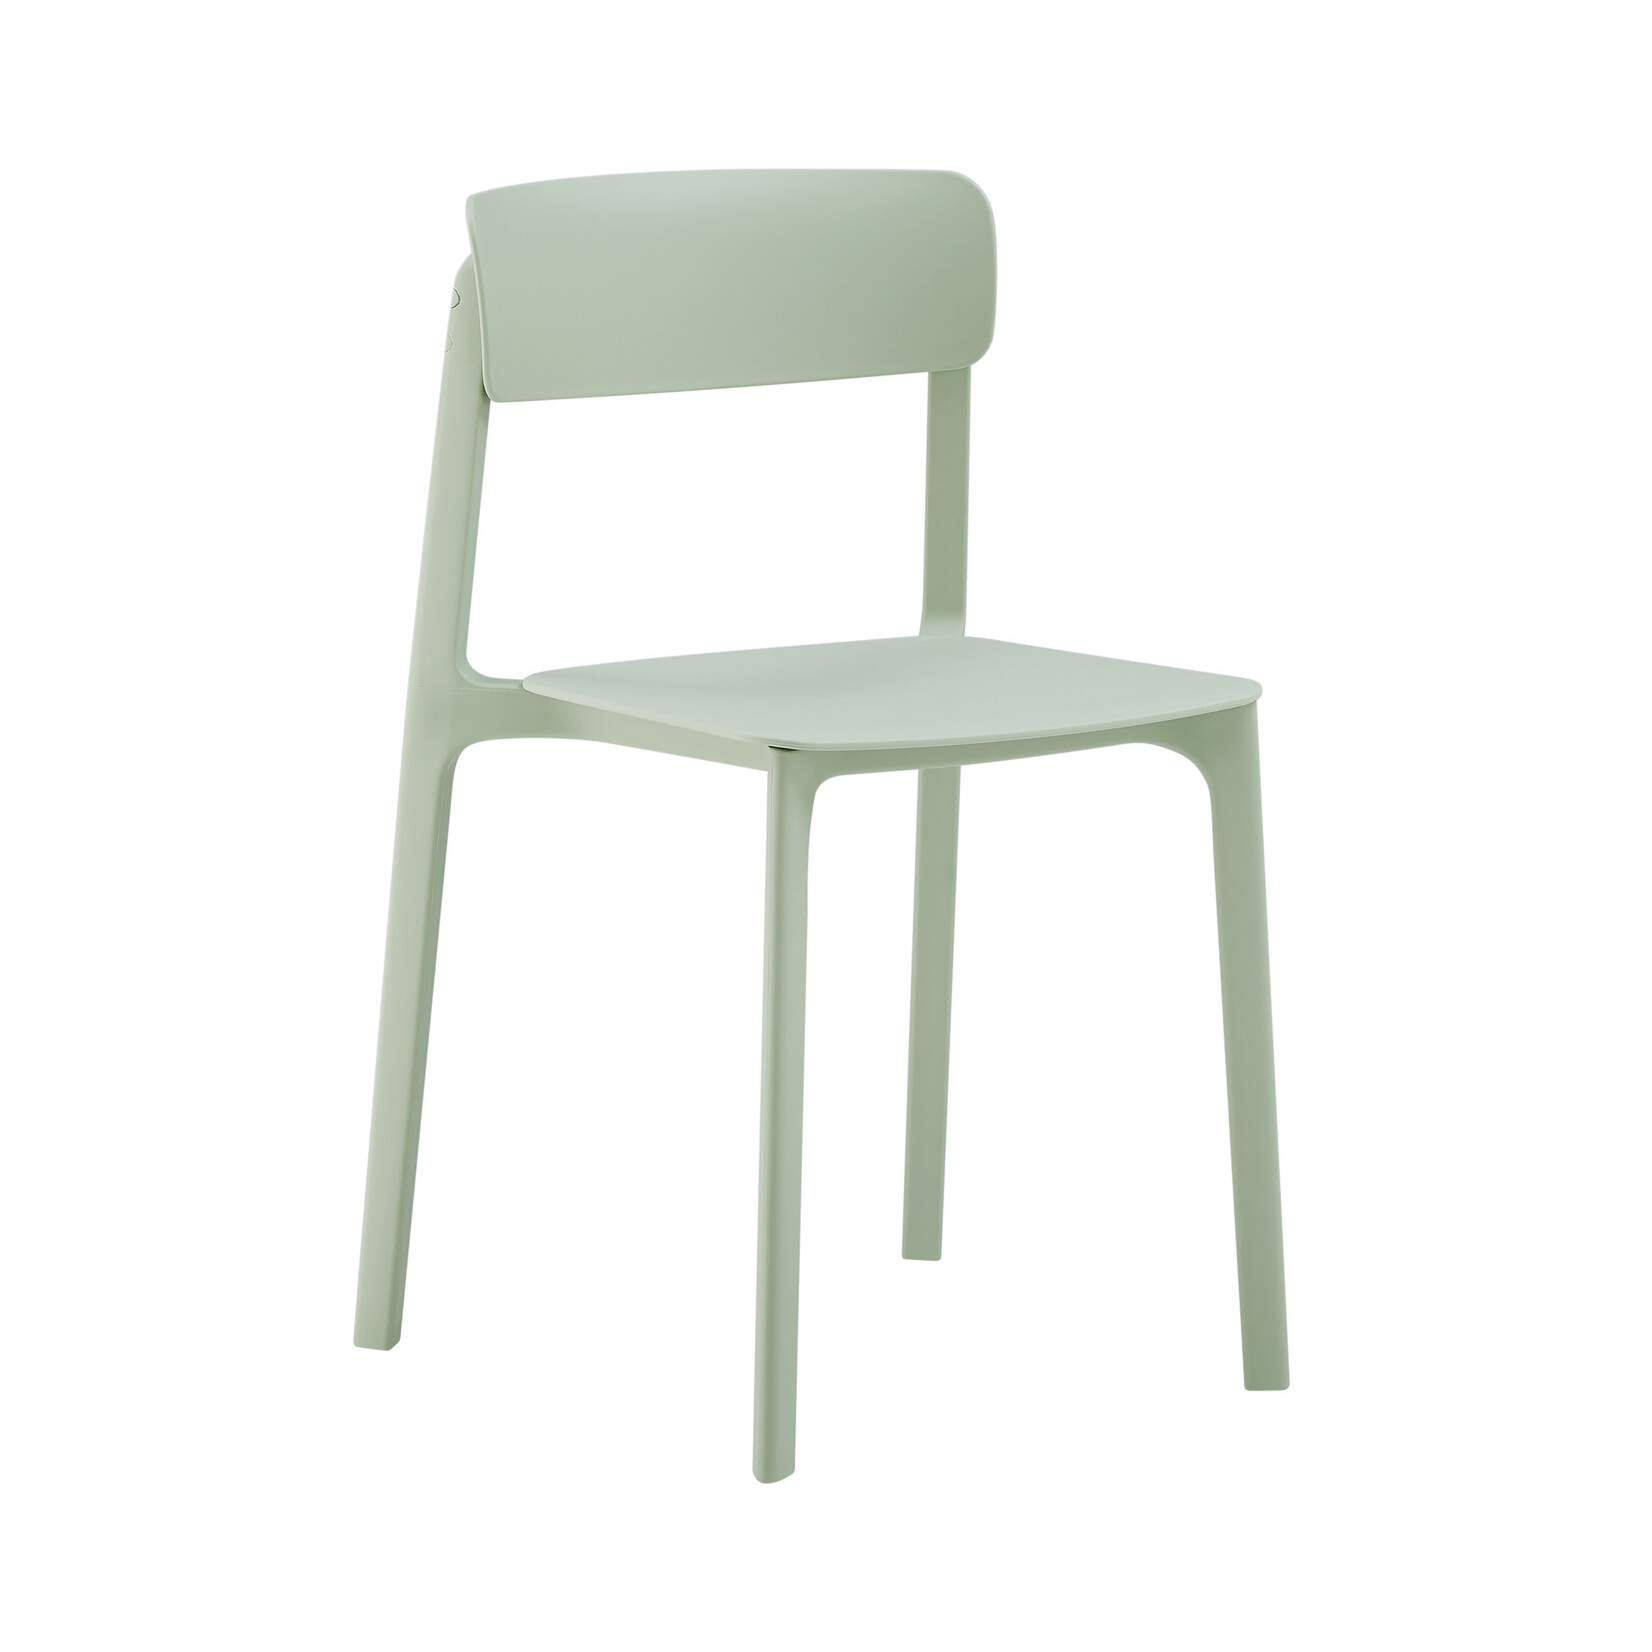 EuroStyle Tibo Indoor/Outdoor Side Chair Mint